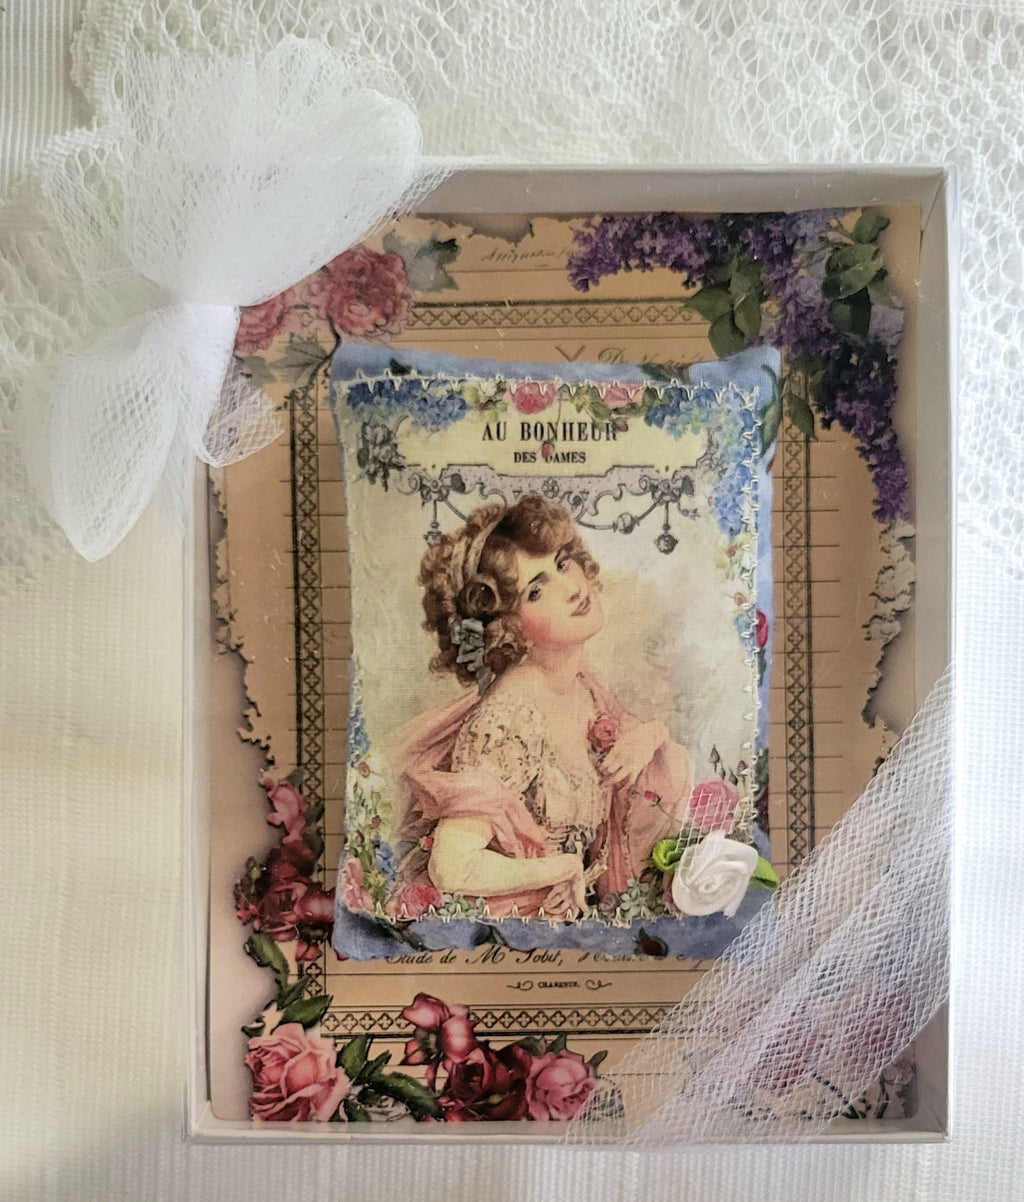 Fancy French Lady Lovely Lavender Scented Gift Boxed Sachet - Annette - One of a Kind!